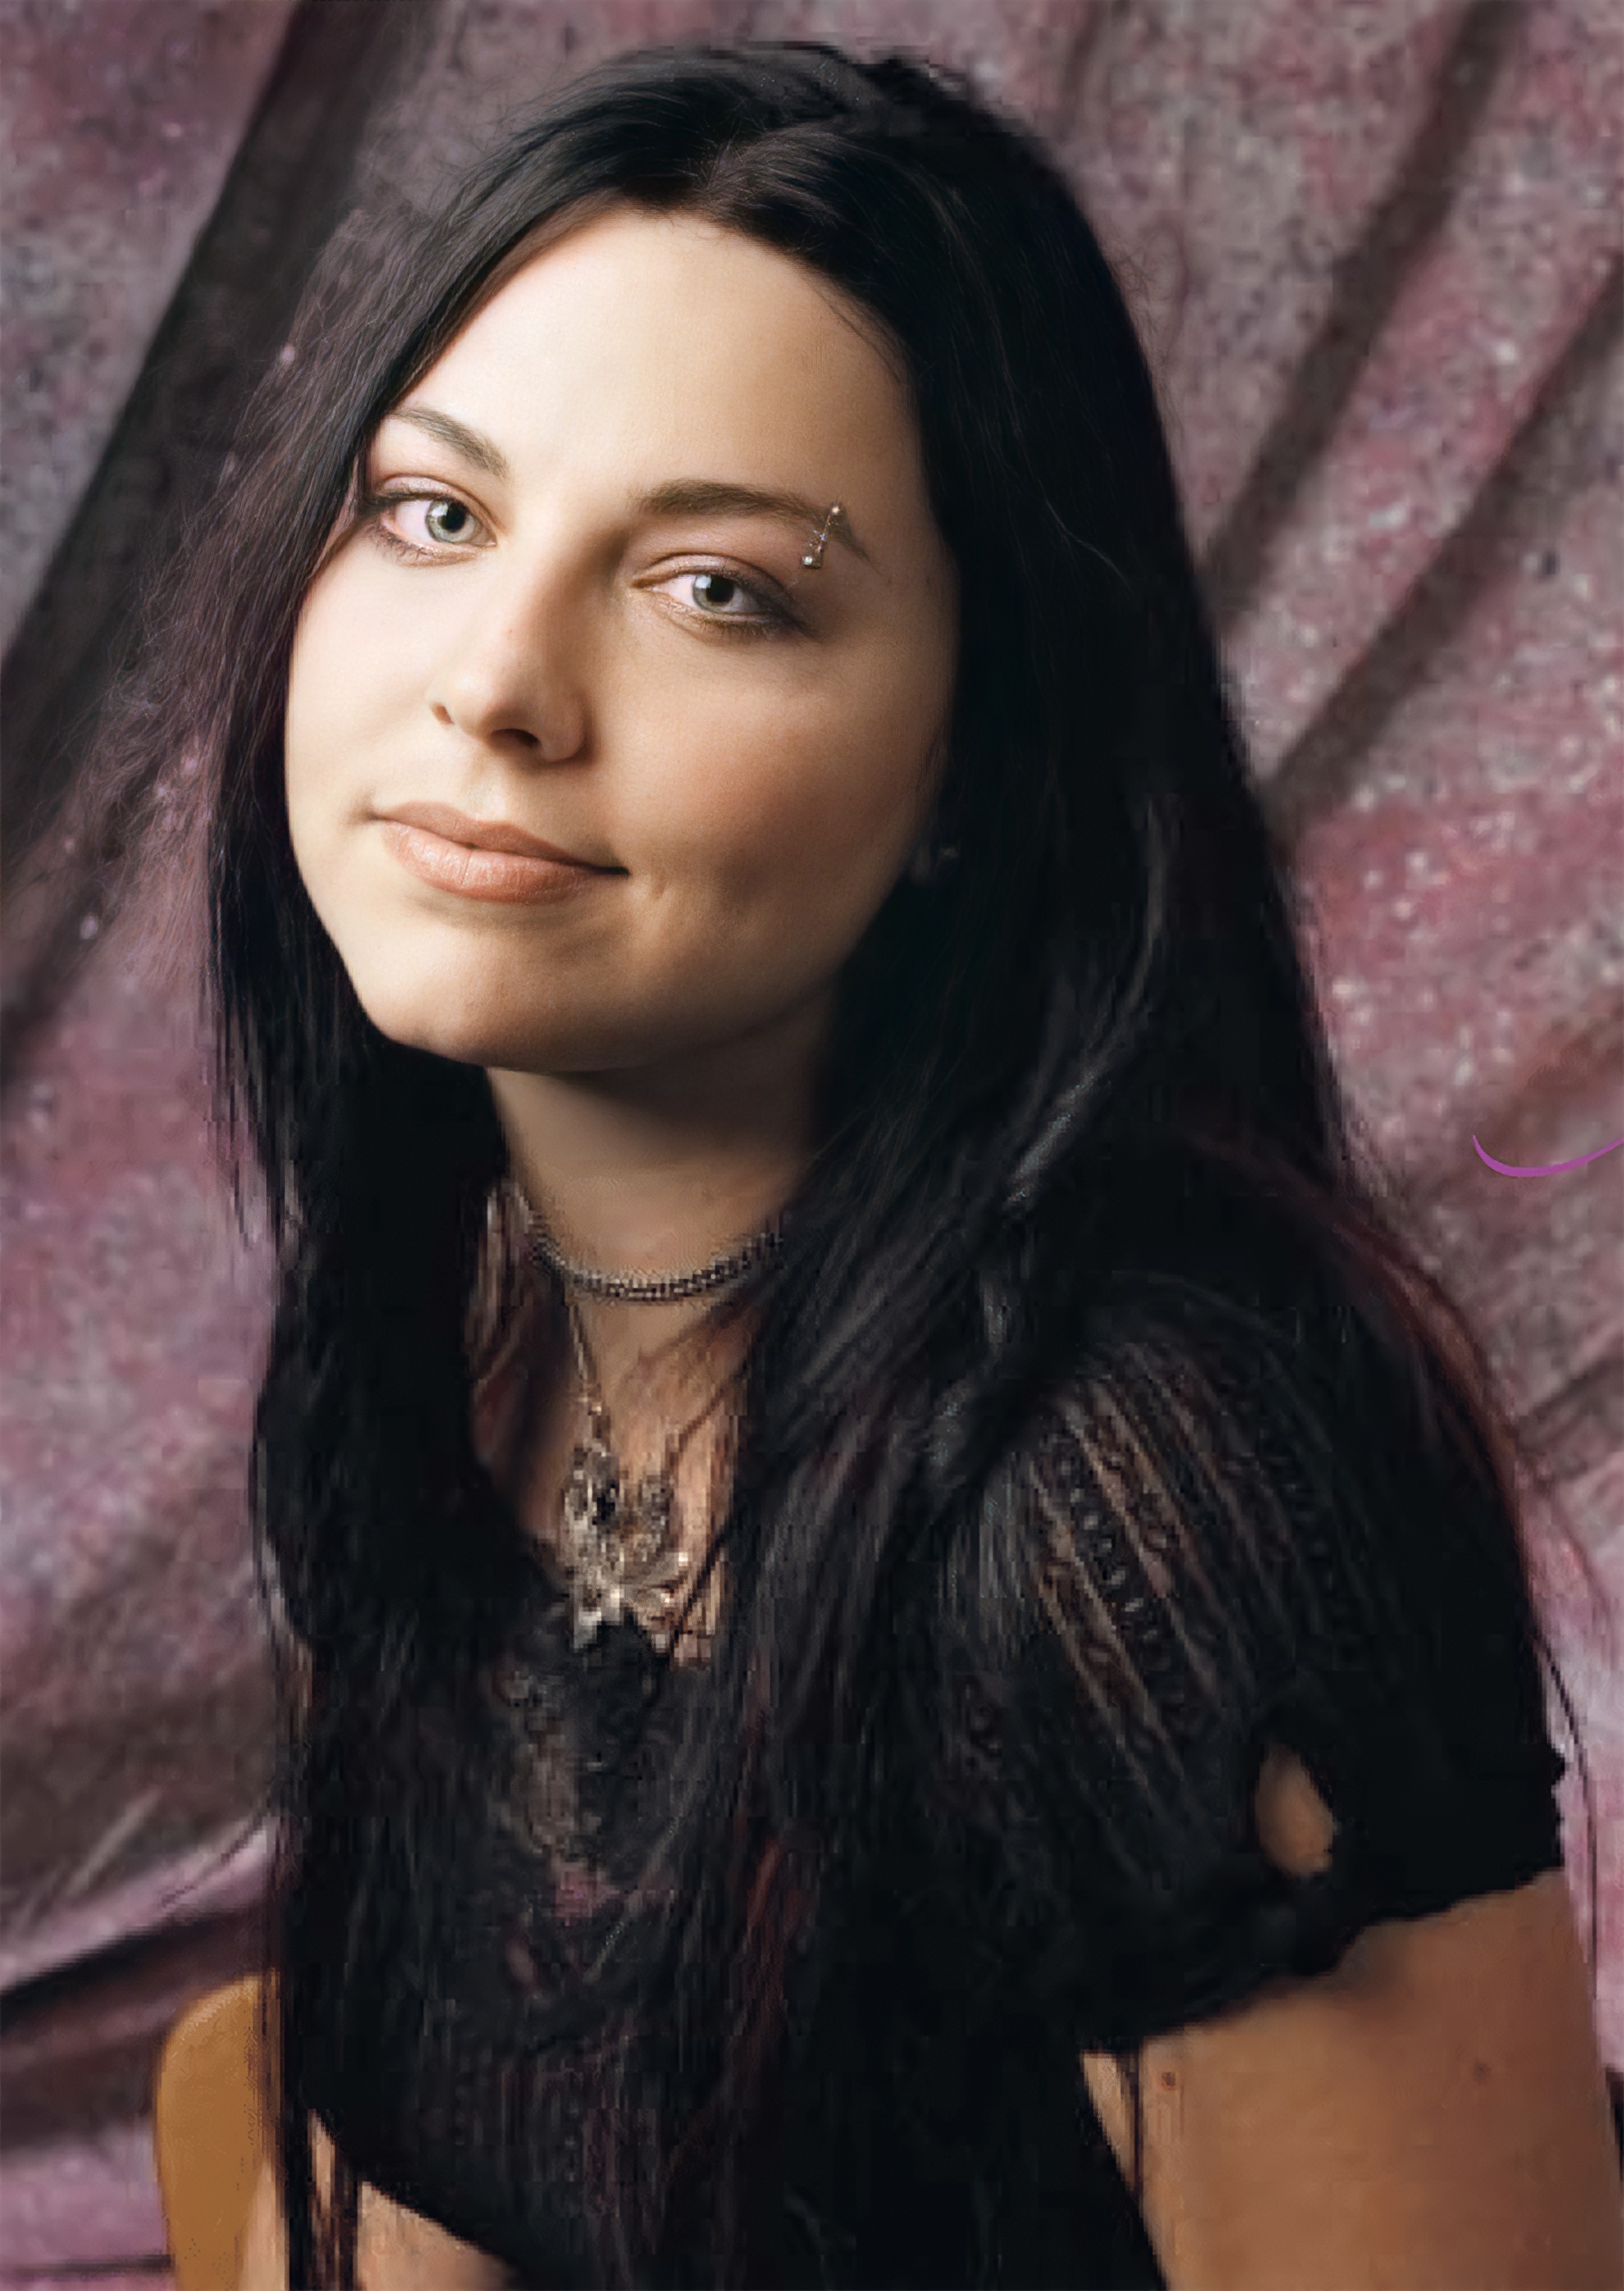 2904x4096
Keywords: amy lee;photoshoot;out of the shadows;2016